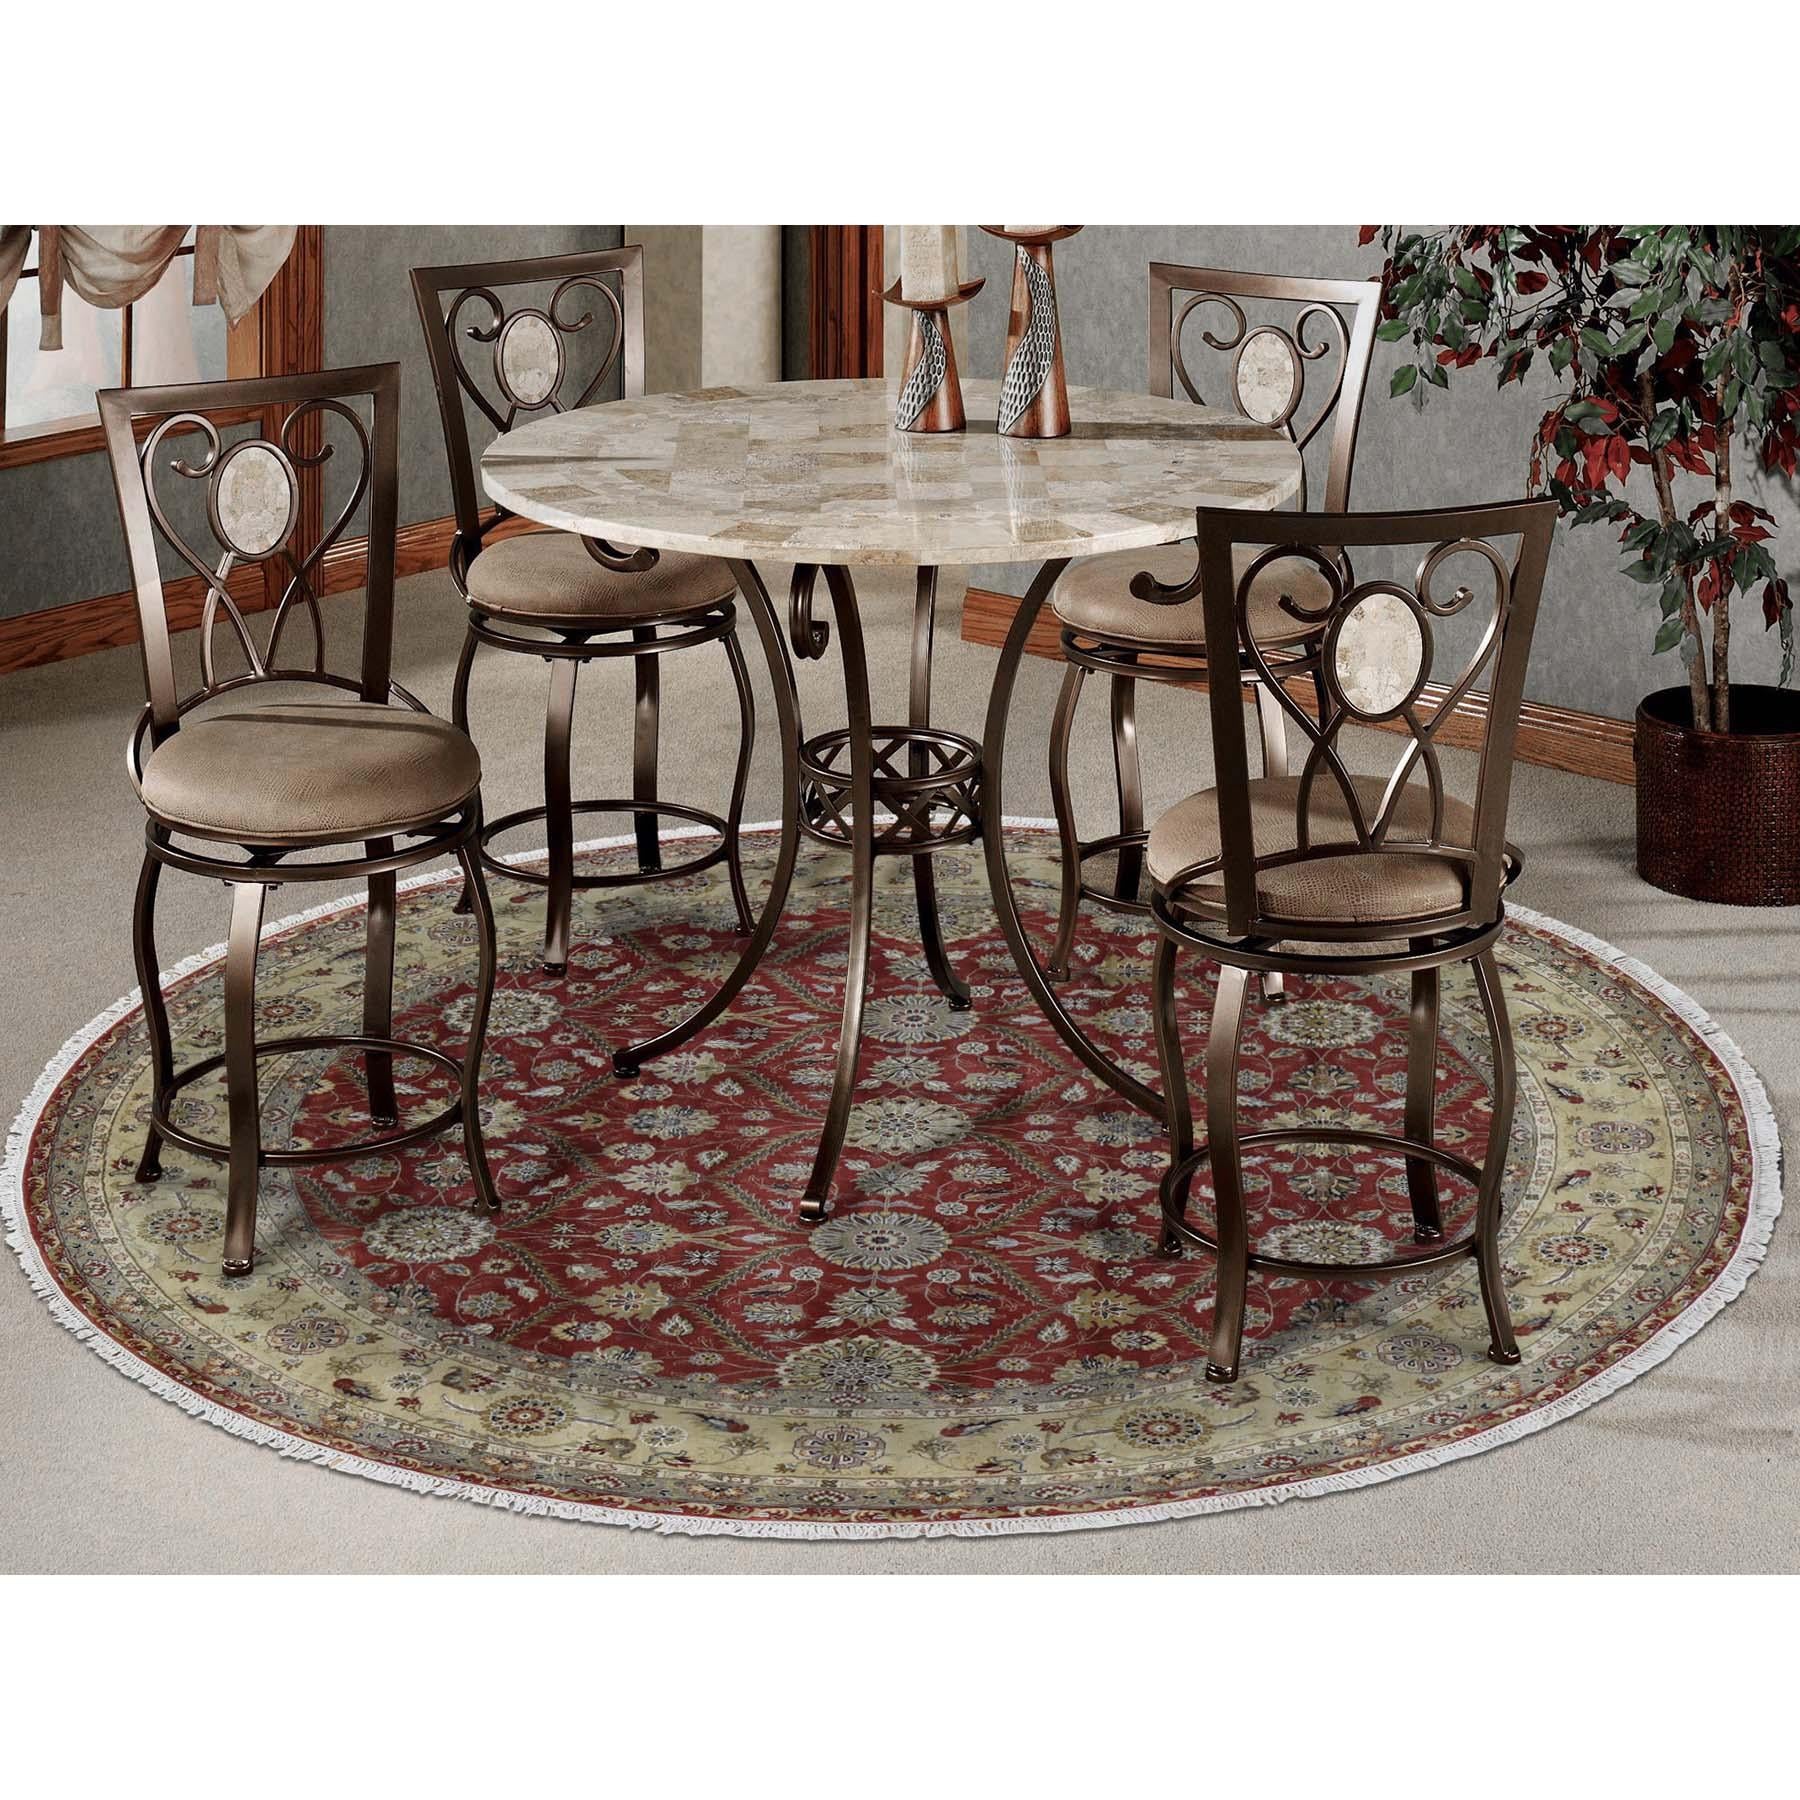 This is a truly genuine one-of-a-kind Hereke design wool and silk hand knotted 300 kpsi round Oriental rug. It has been knotted for months and months in the centuries-old Persian weaving craftsmanship techniques by expert artisans. Measures: 9'0